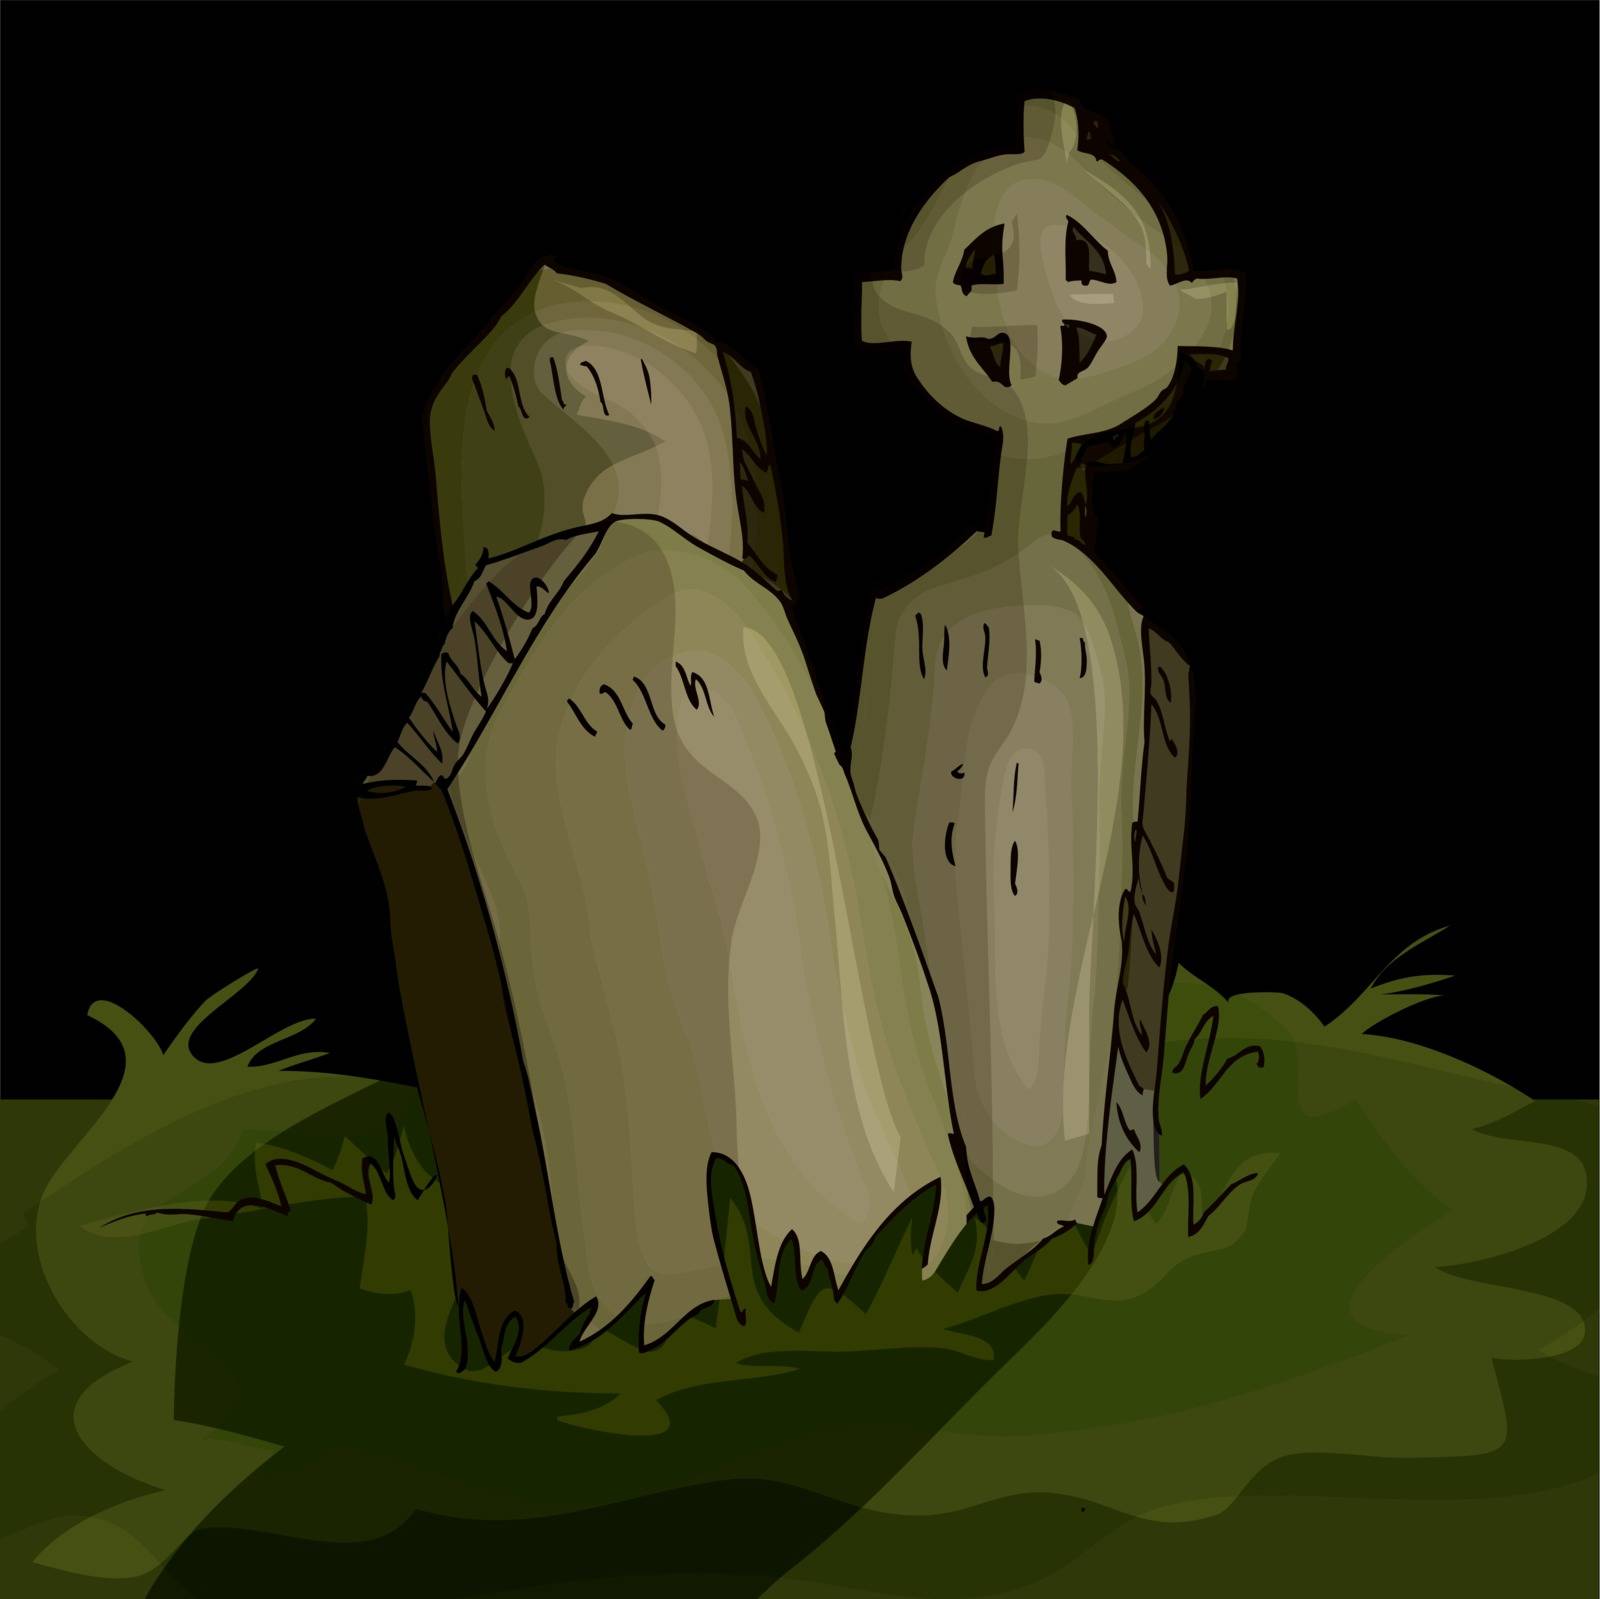 Gravestones in a graveyard in the night time